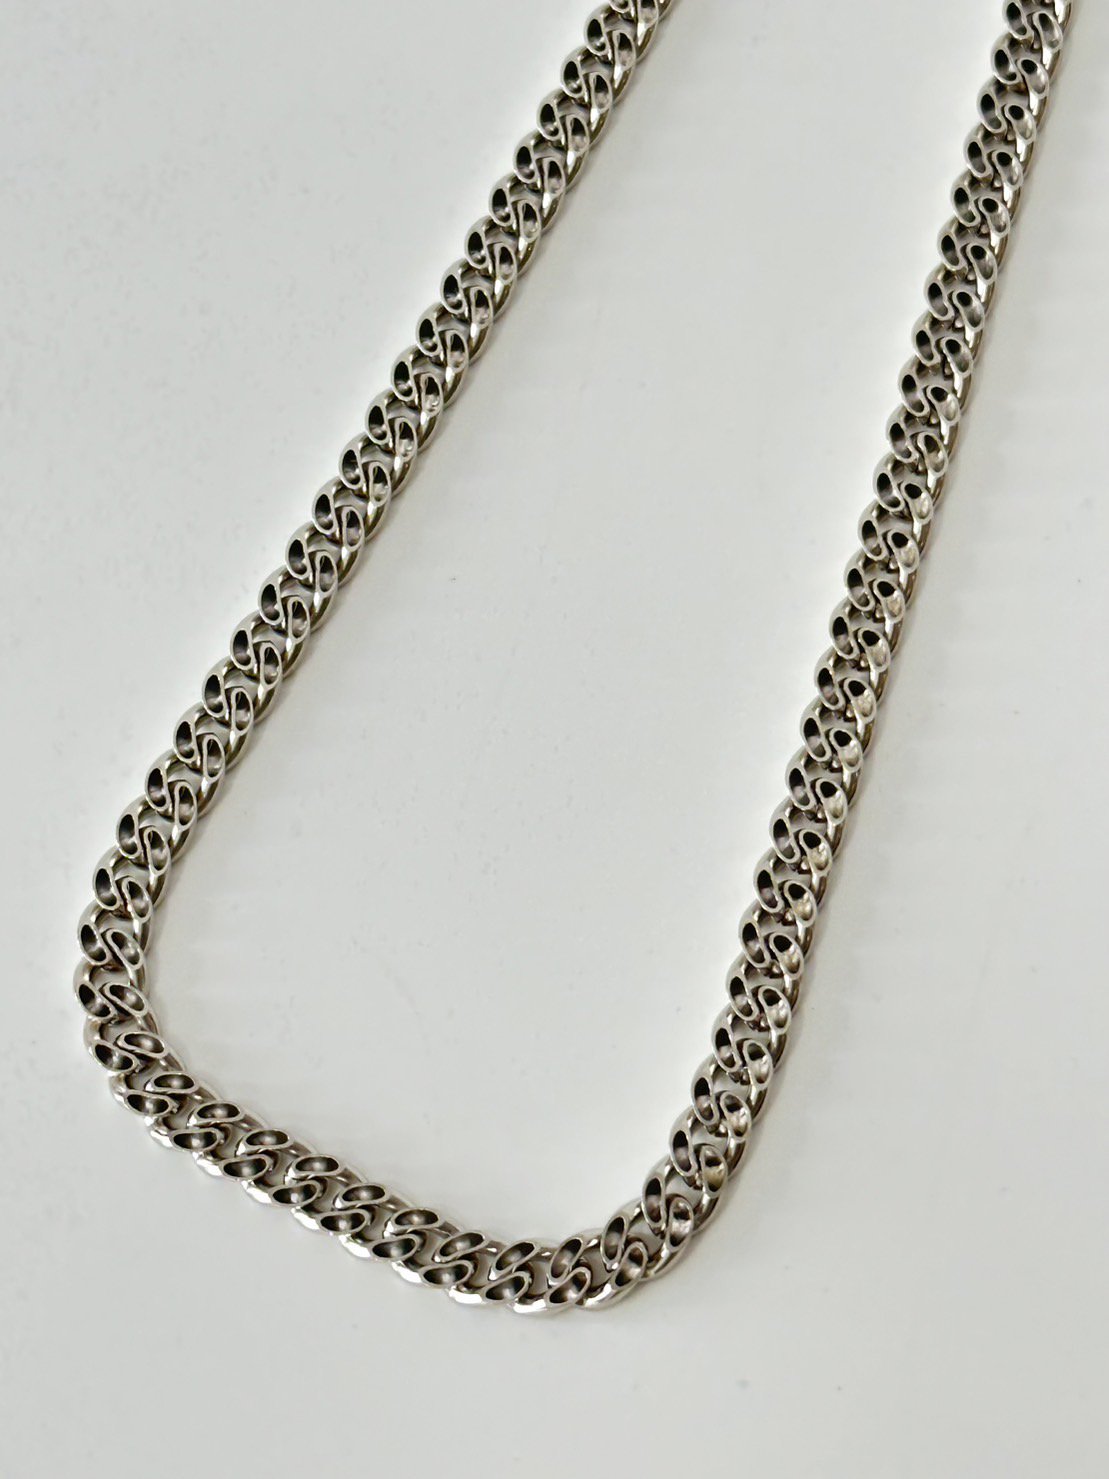 LITTLEBIG<br />Cut Chain Necklace / Silver<img class='new_mark_img2' src='https://img.shop-pro.jp/img/new/icons14.gif' style='border:none;display:inline;margin:0px;padding:0px;width:auto;' />